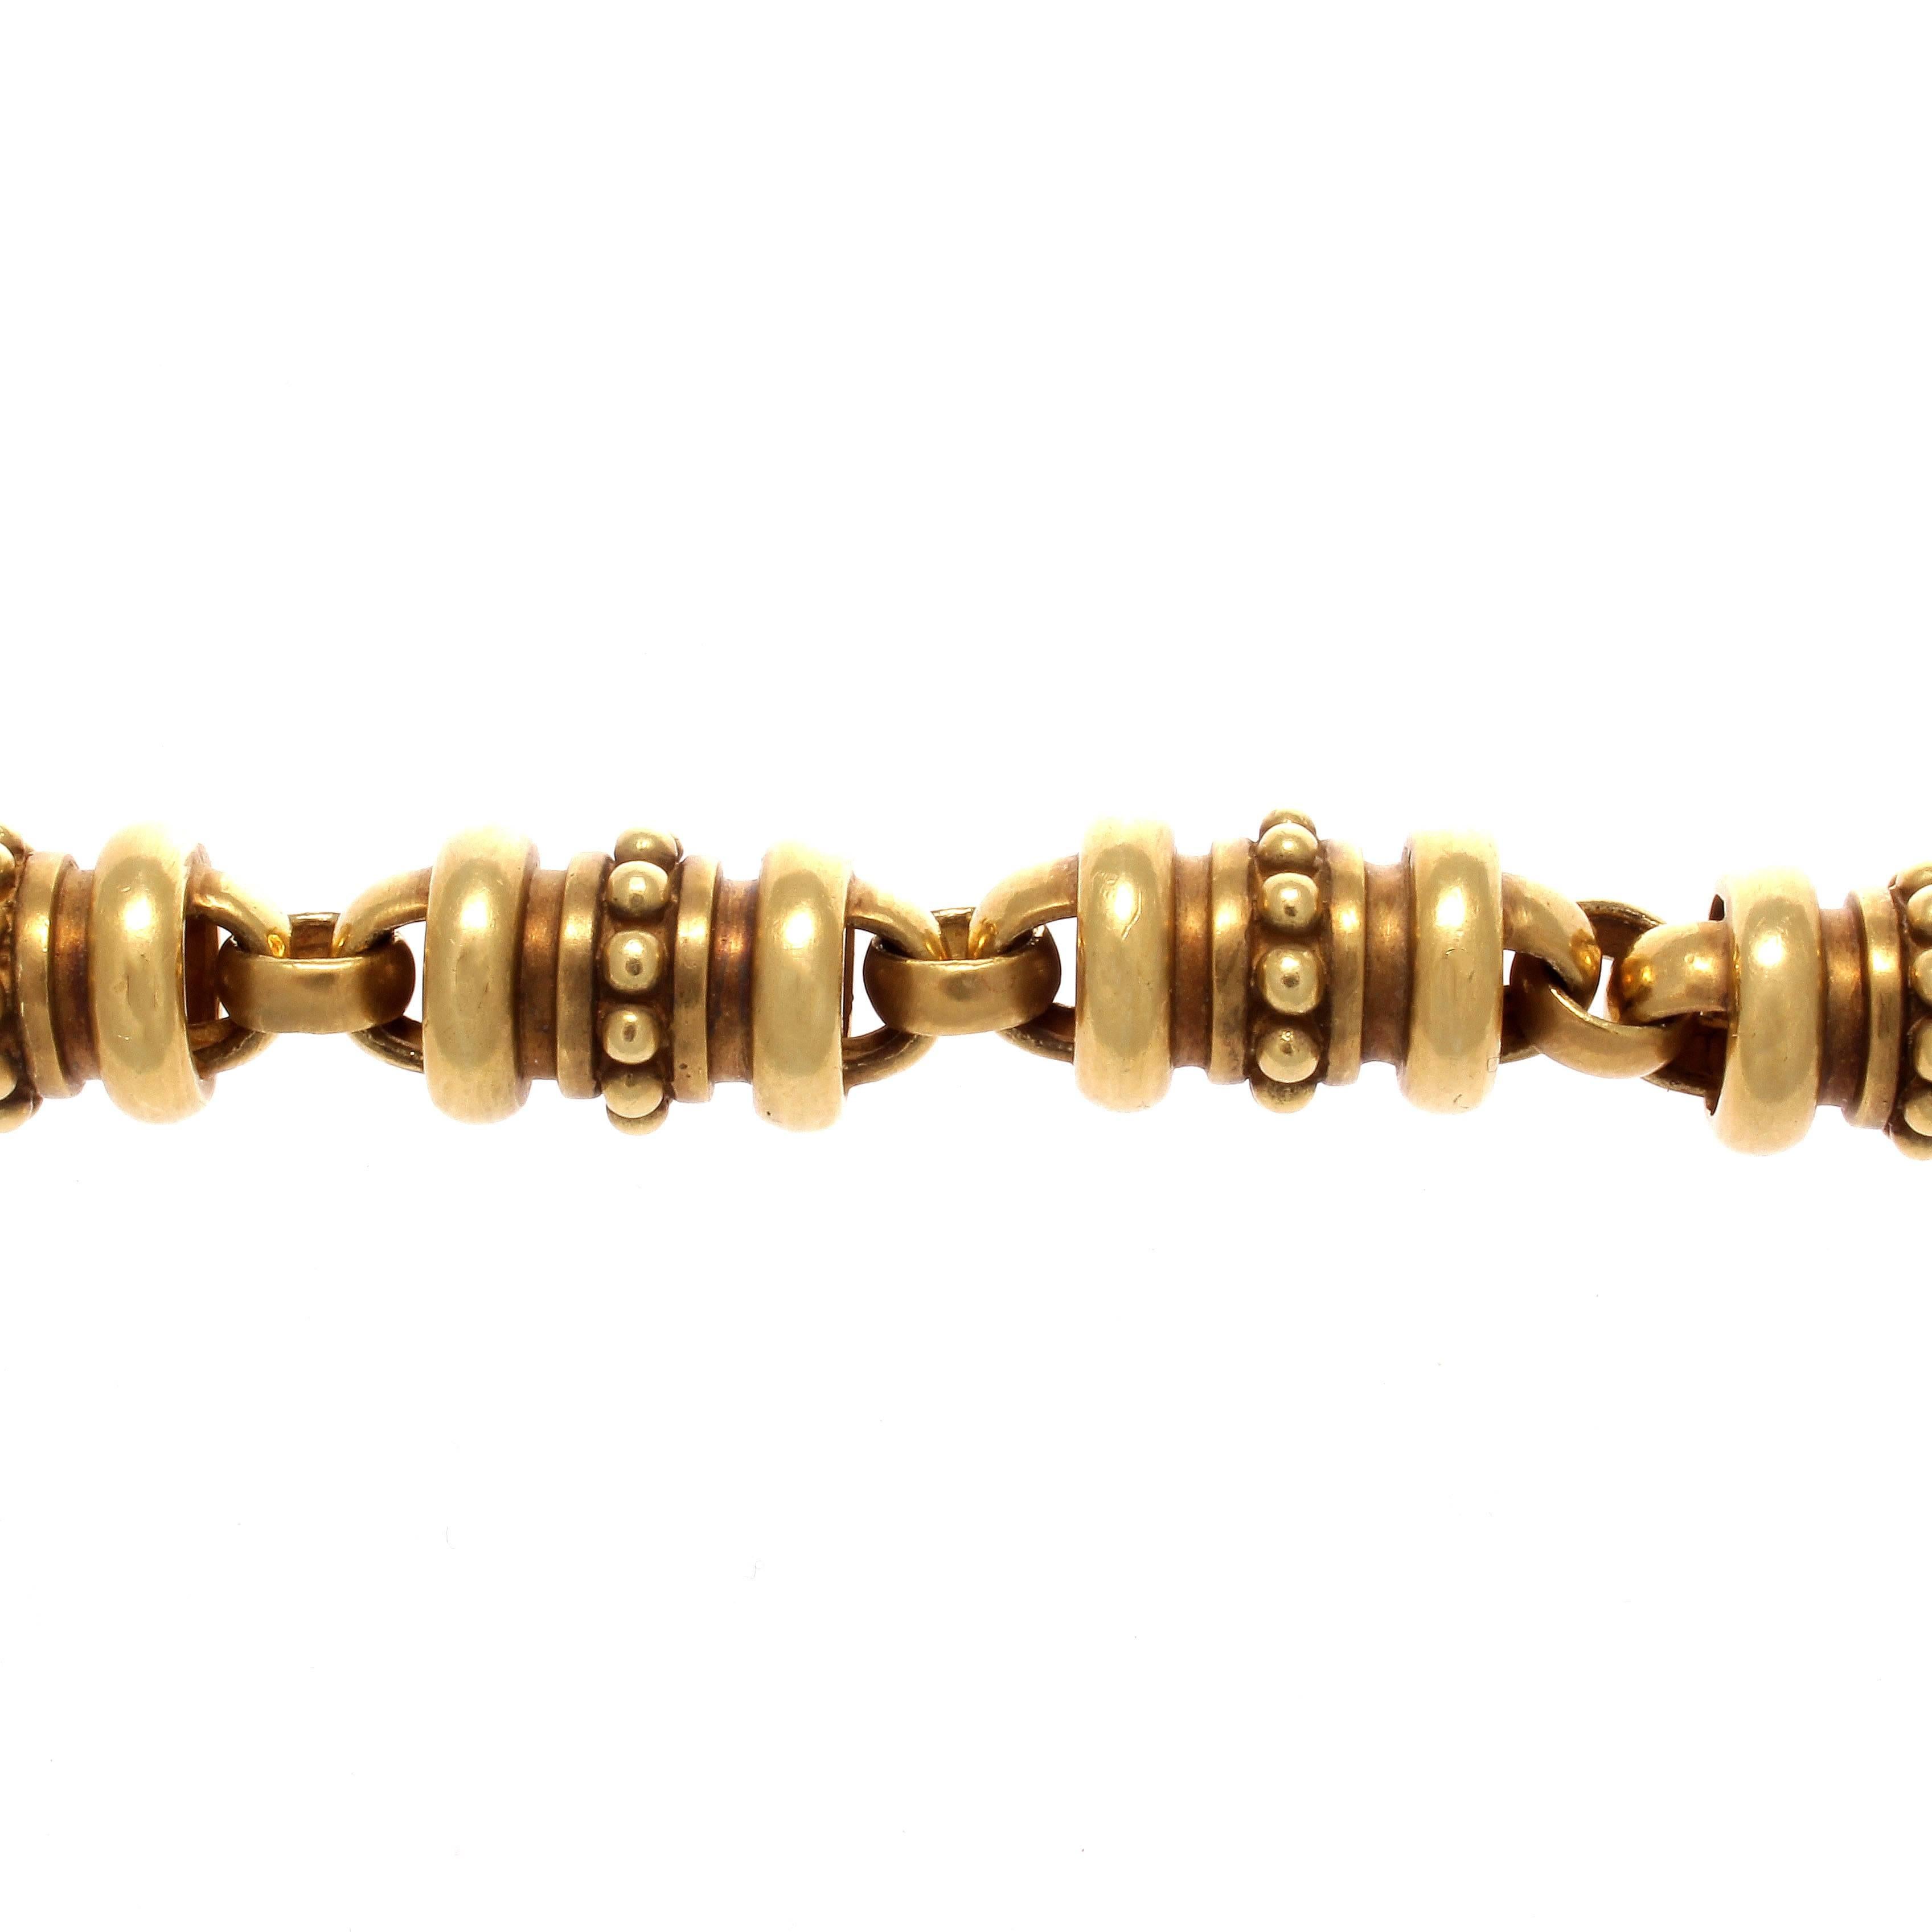 Kieselstein's artistic vision and his unique and singular designs create his recognizable line of jewelry. The symmetrical bracelet is made with finely detailed 18k yellow gold. Signed Kieselstein-Cord. Weighs 69.7 gram. 7-1/2 inches long